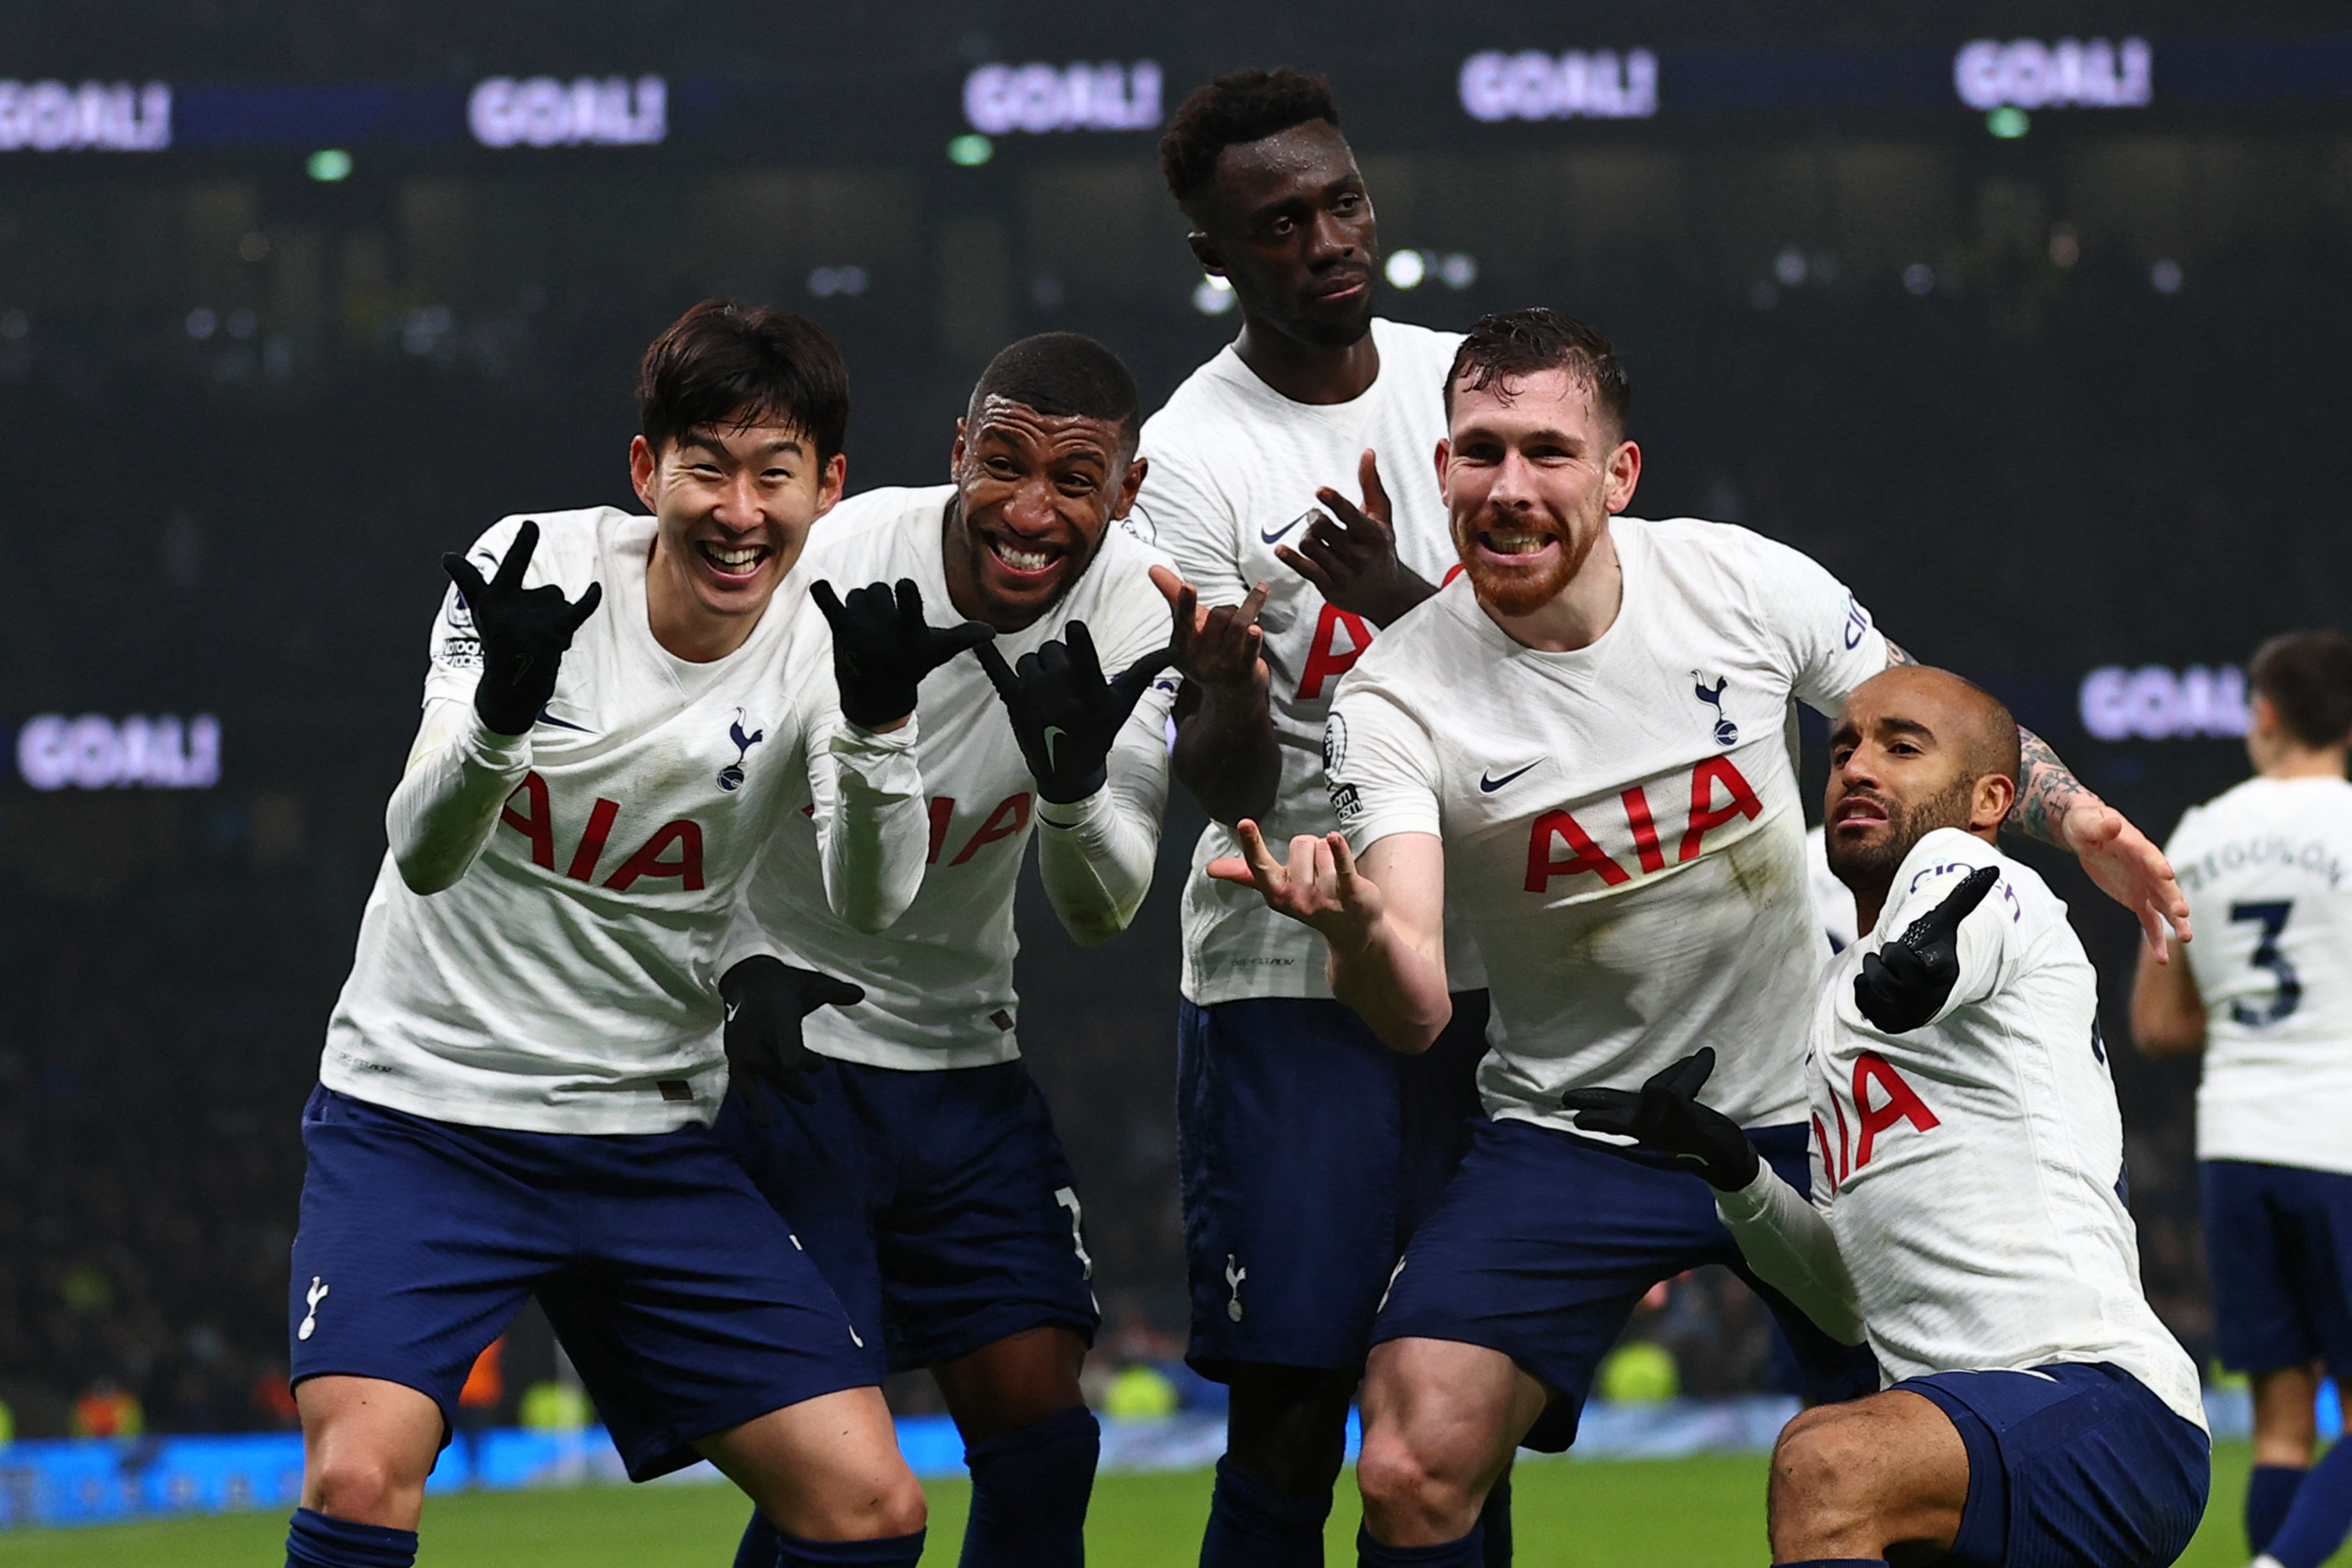 GOAL - Son Heung-min hit the Spiderman celebration after